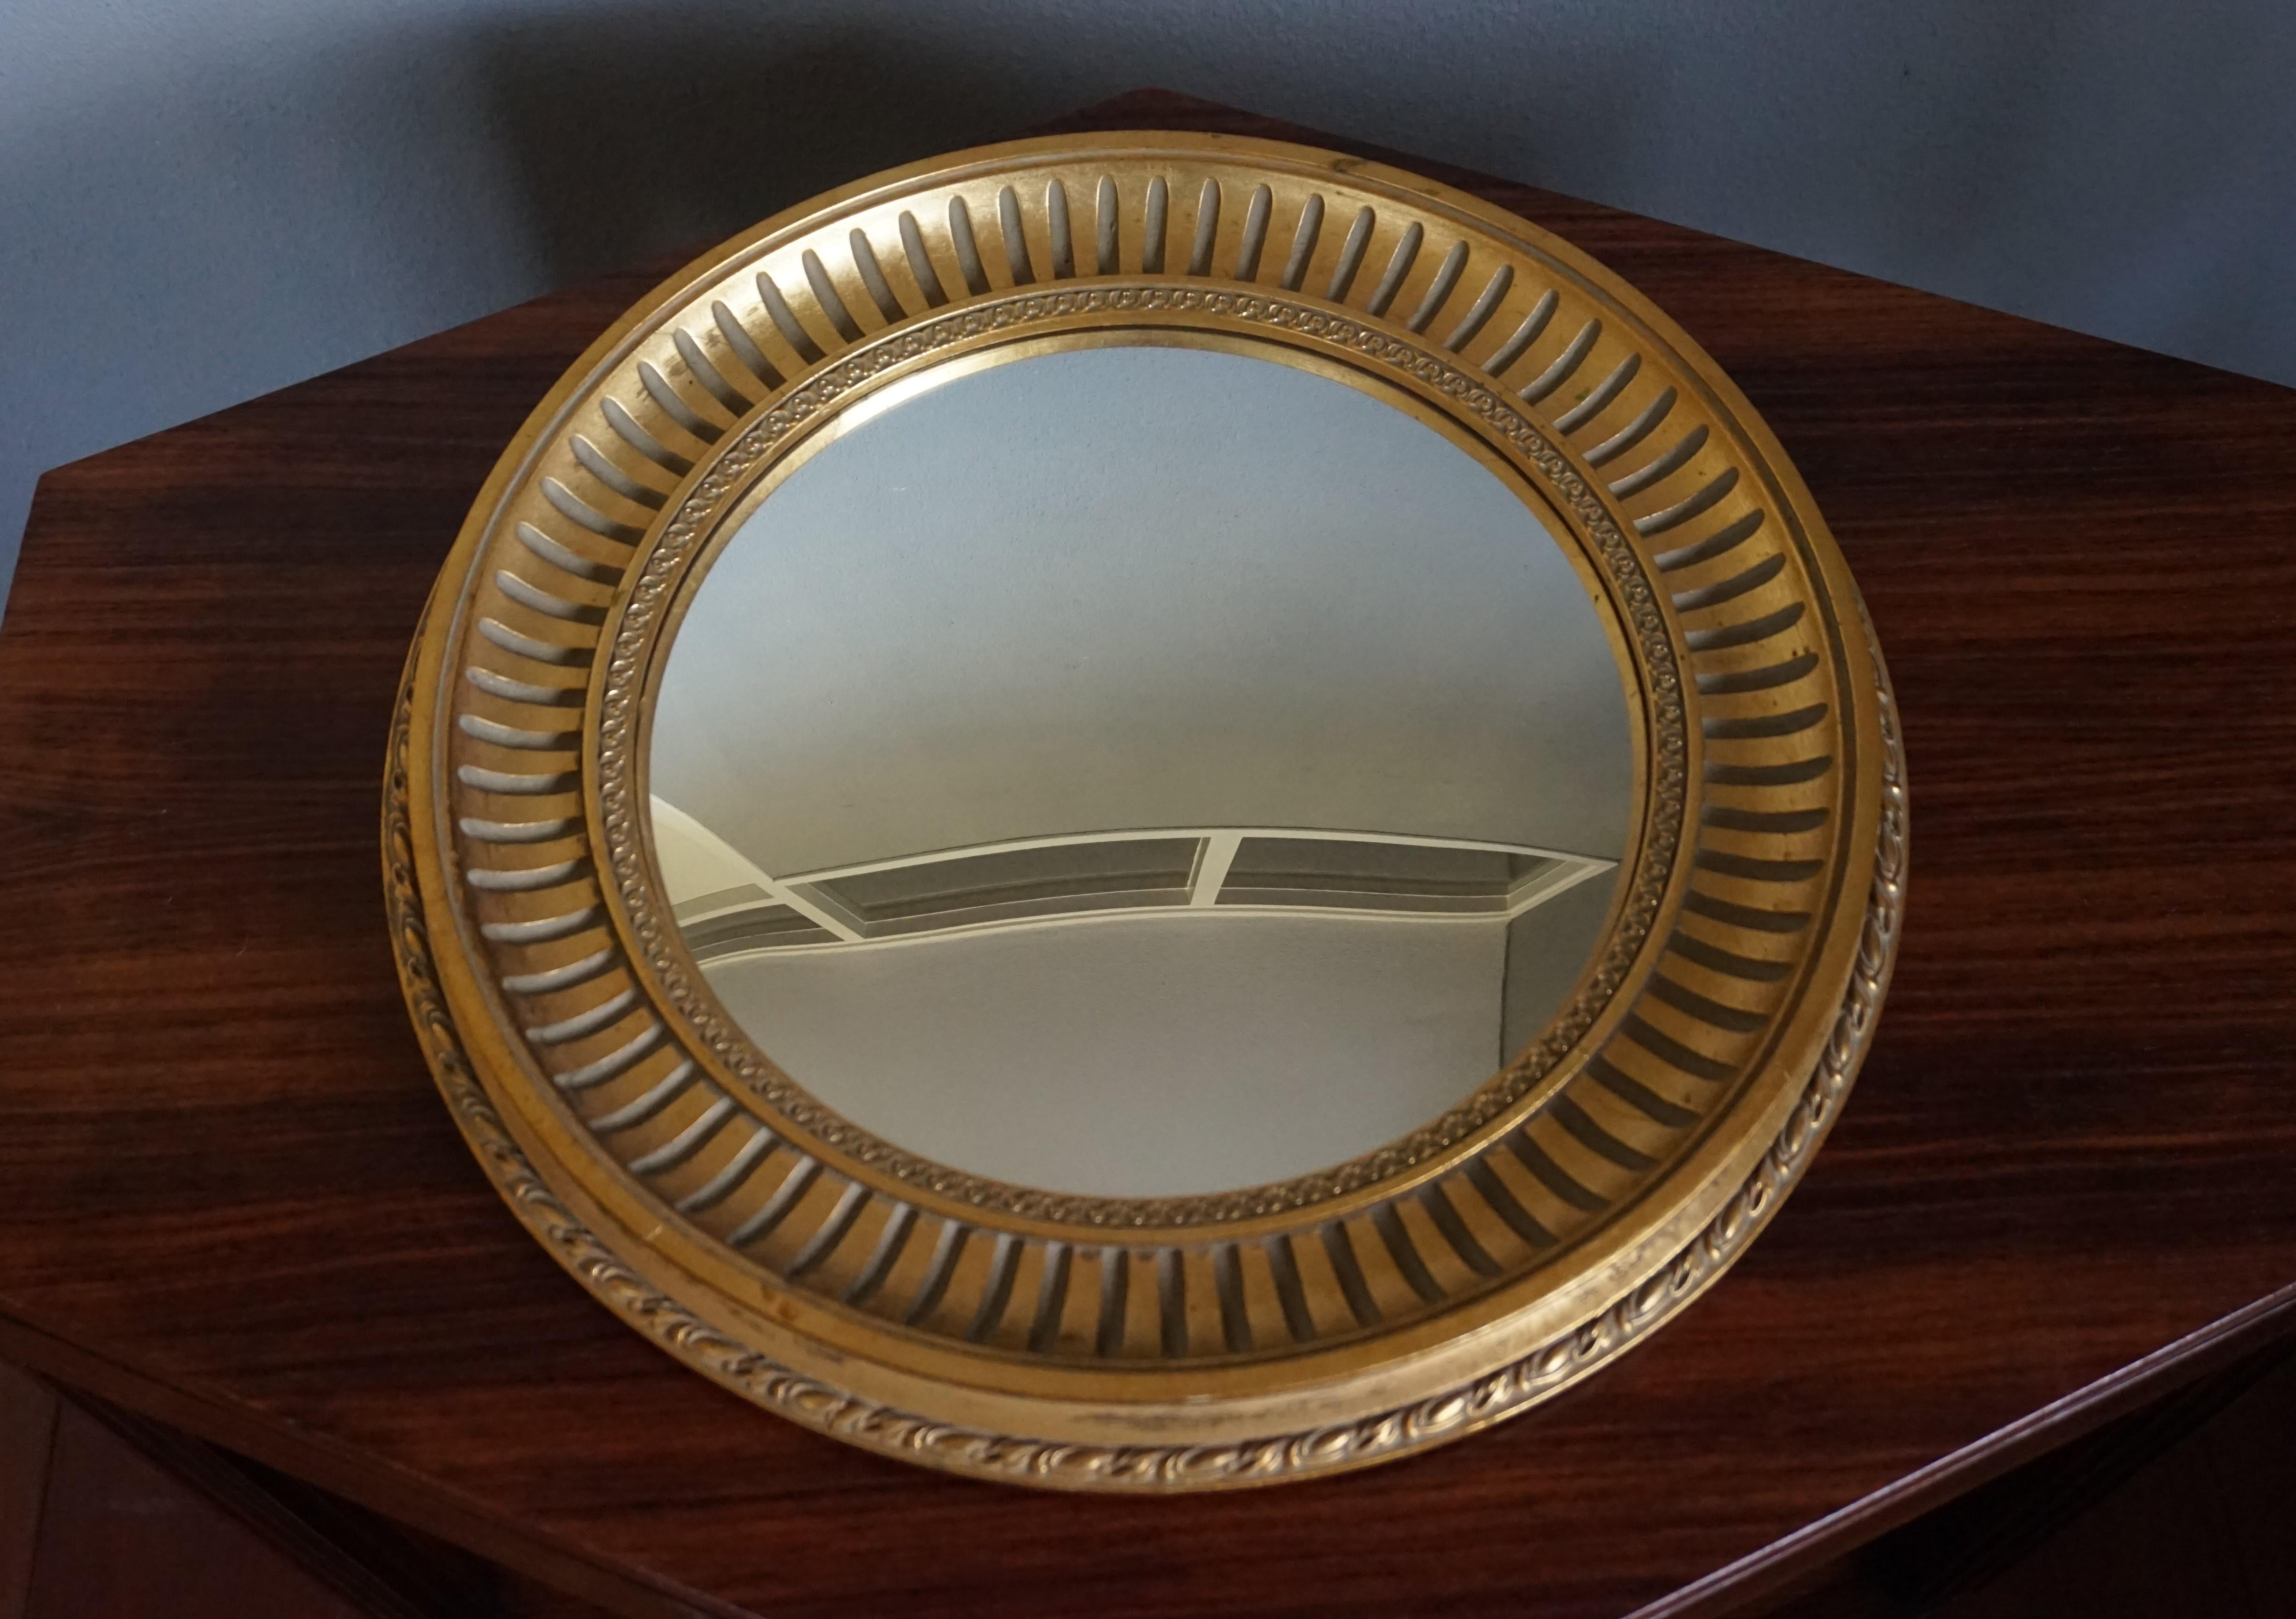 Midcentury Made Round and Gilt Convex or Butler Mirror by Compagnie Des Bronzes 1